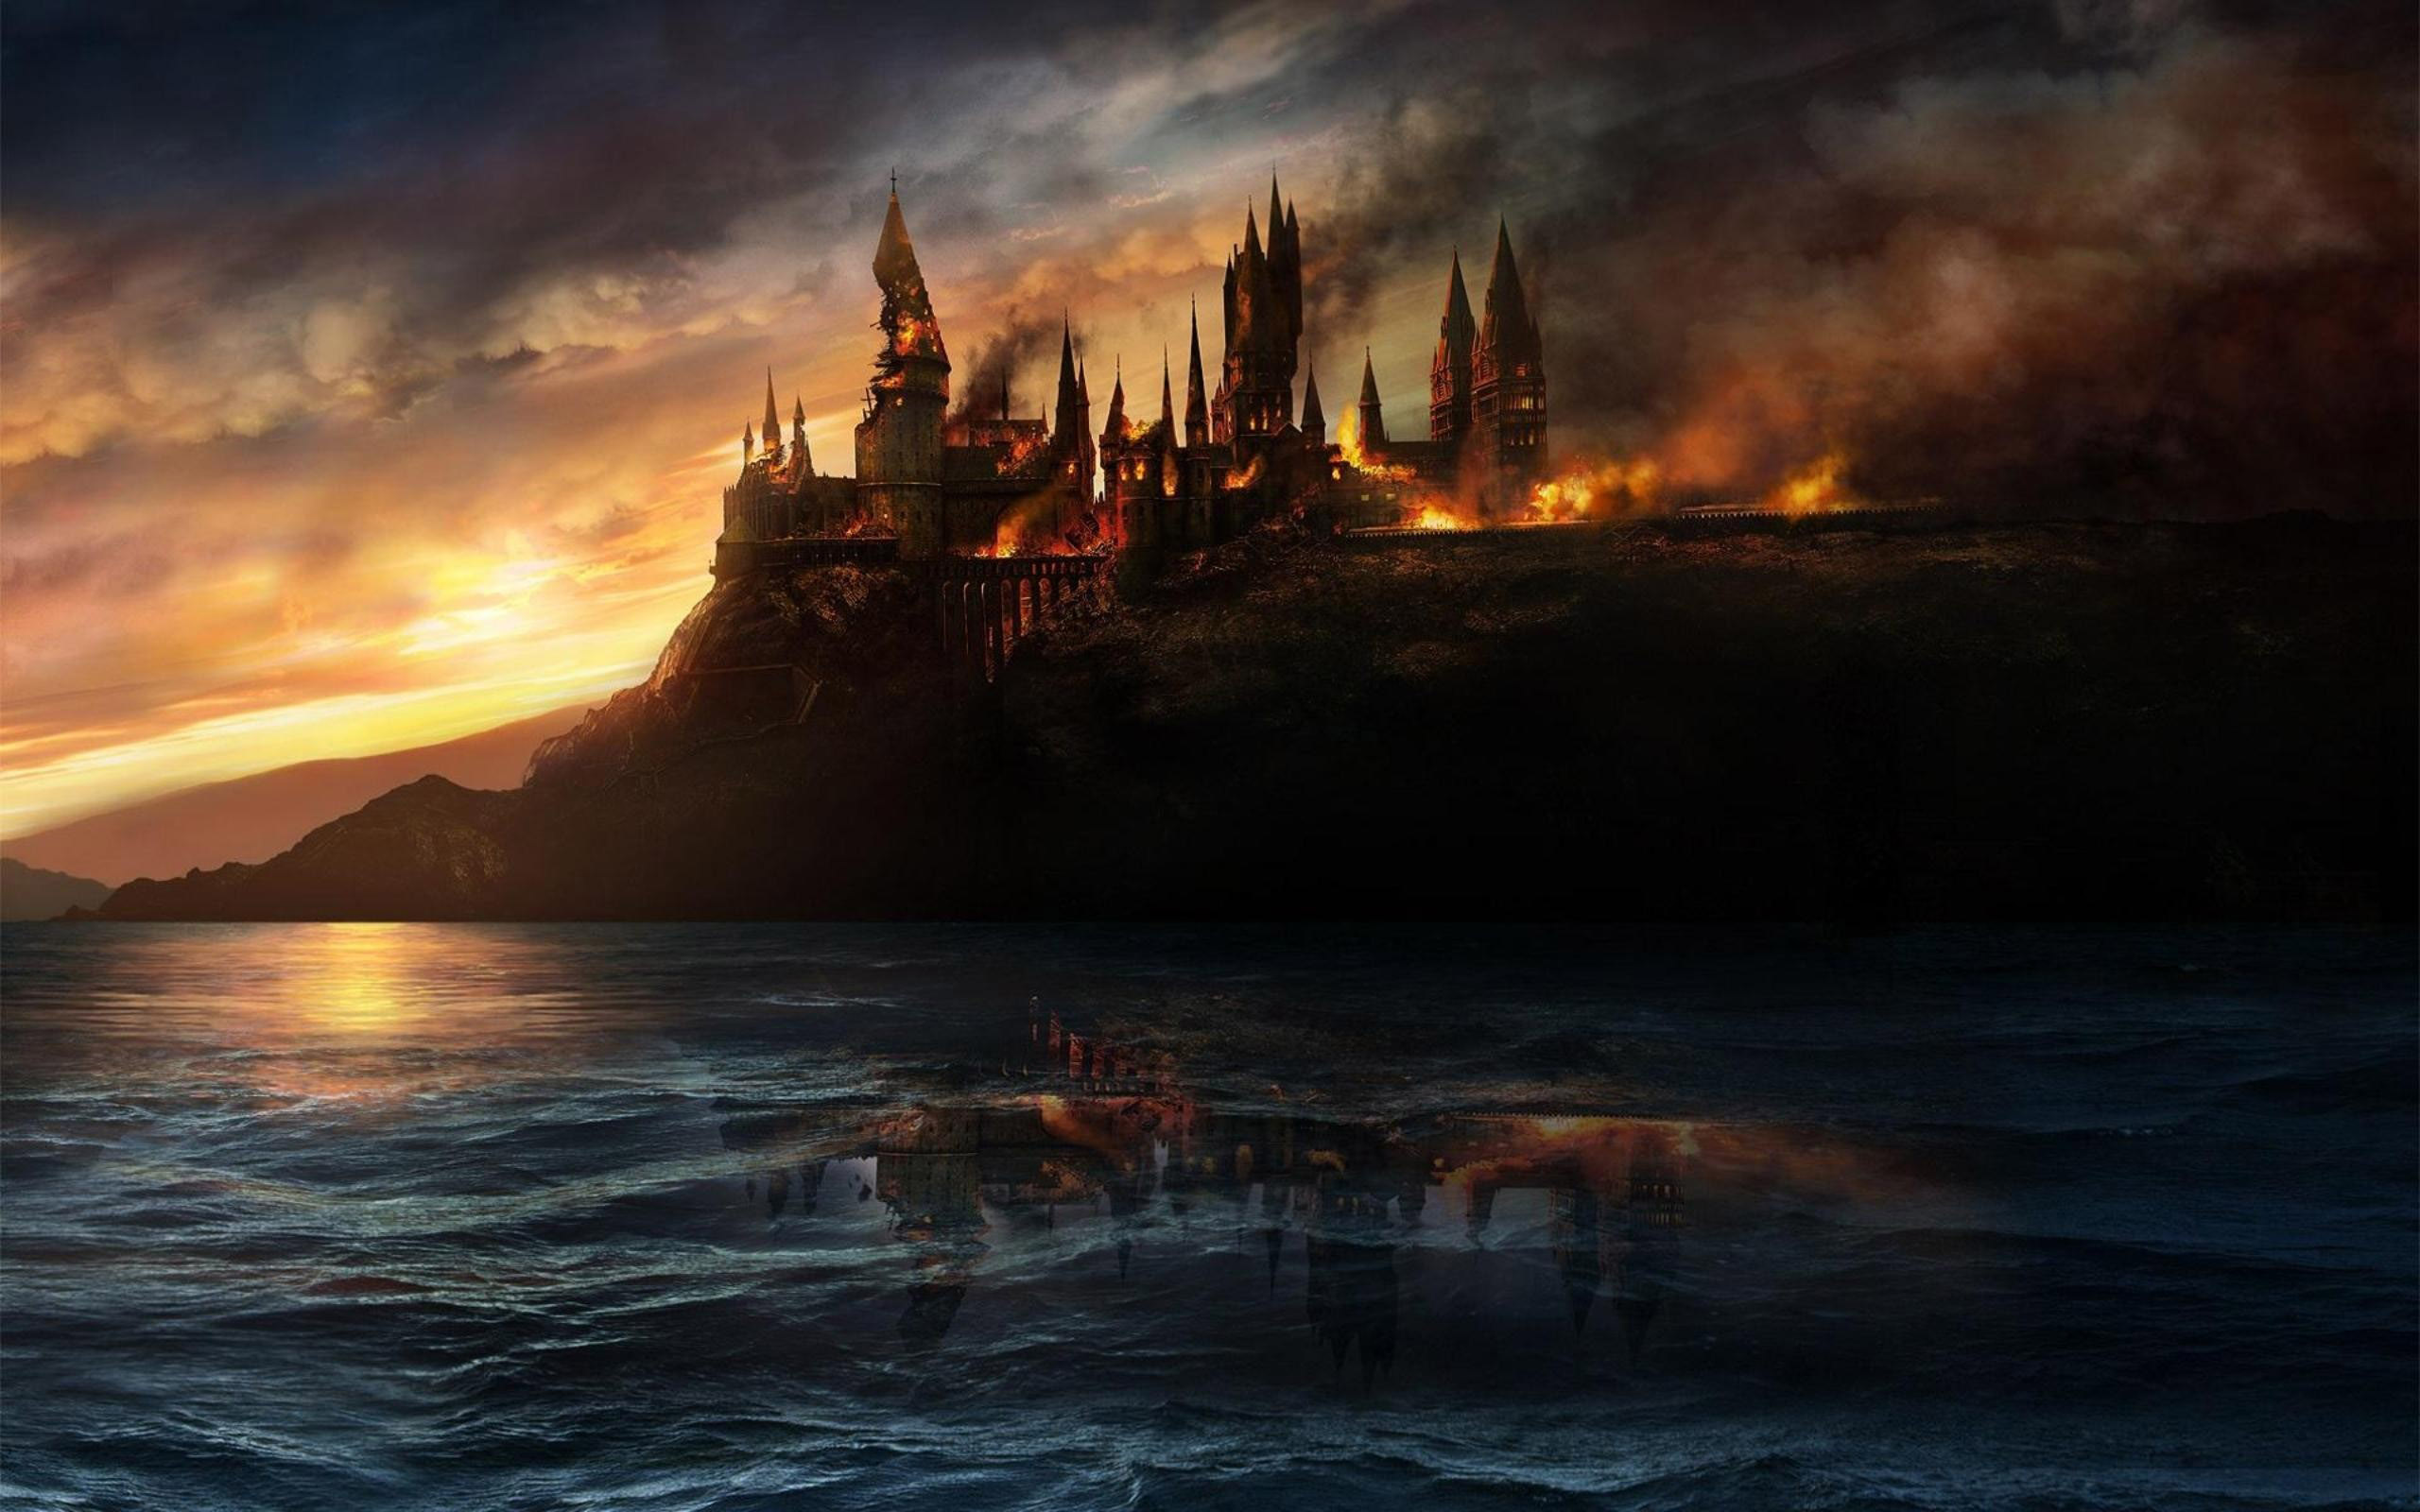 Harry Potter And The Deathly Hallows Hogwarts Castle Wallpaper